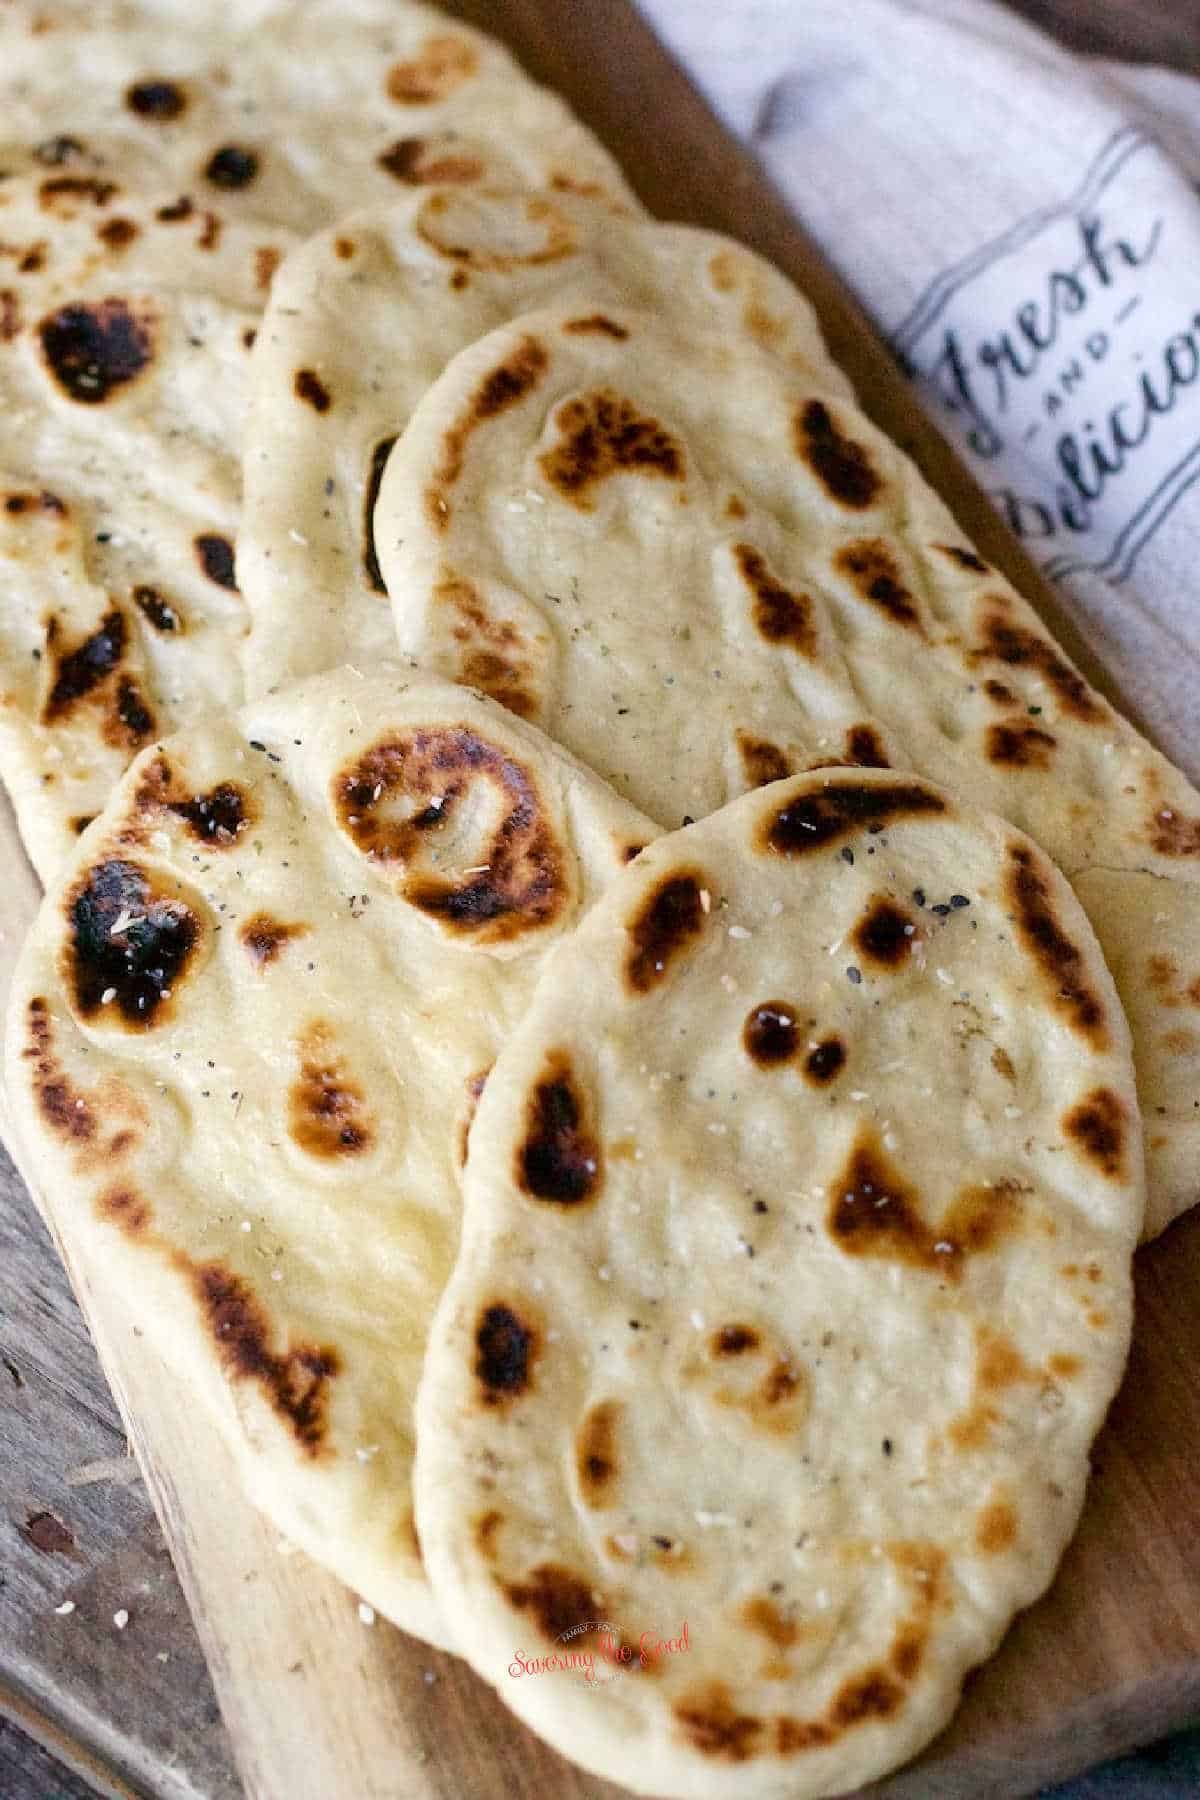 8 pieces of baked Naan Bread on a wooden cutting board